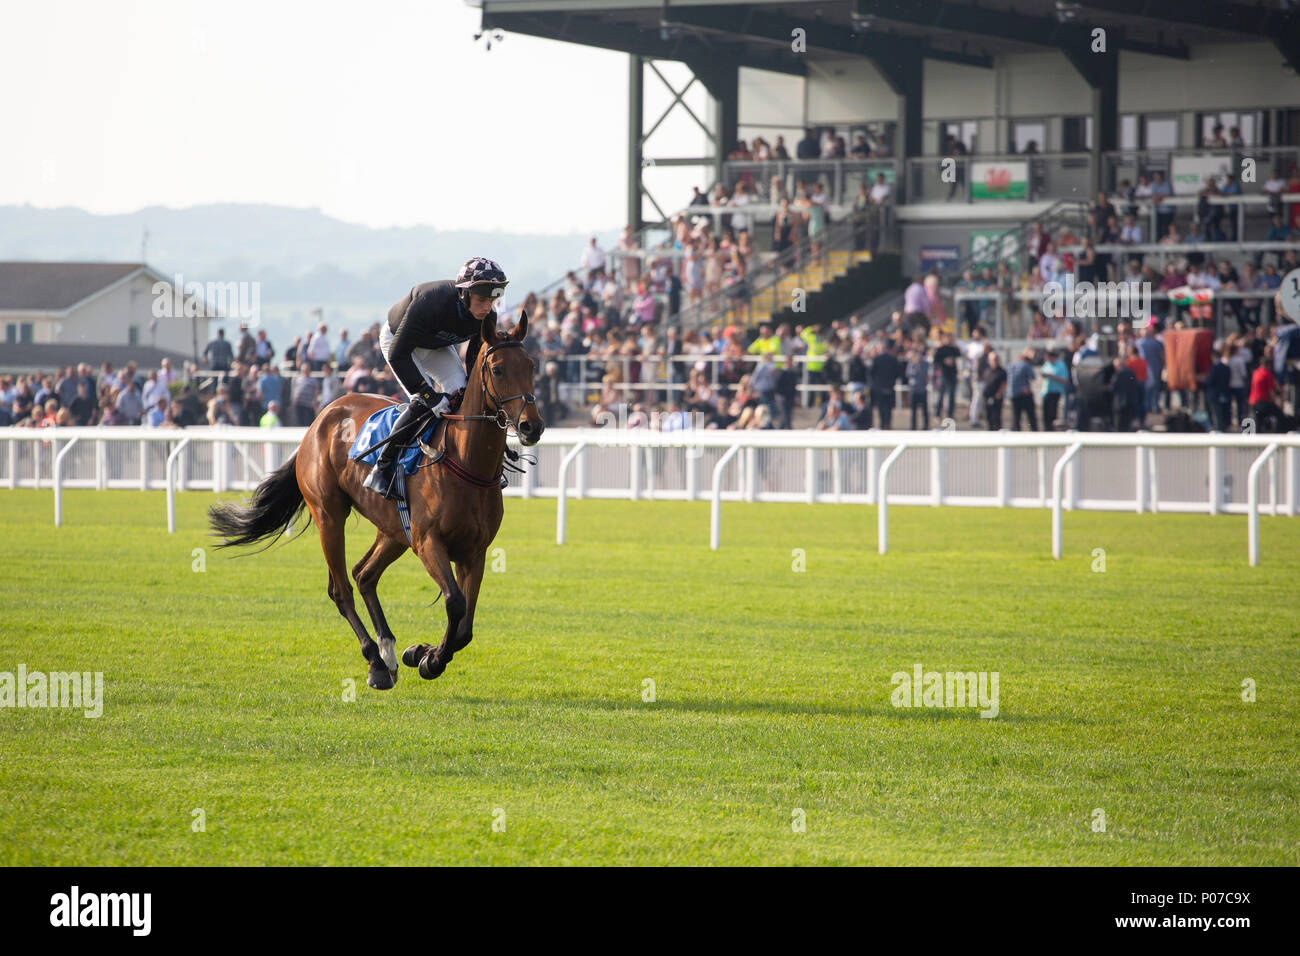 Gone Platinum (jockey Nick Scholfield) rides past the main stand at Ffos Las Racecourse ahead of a race. Stock Photo